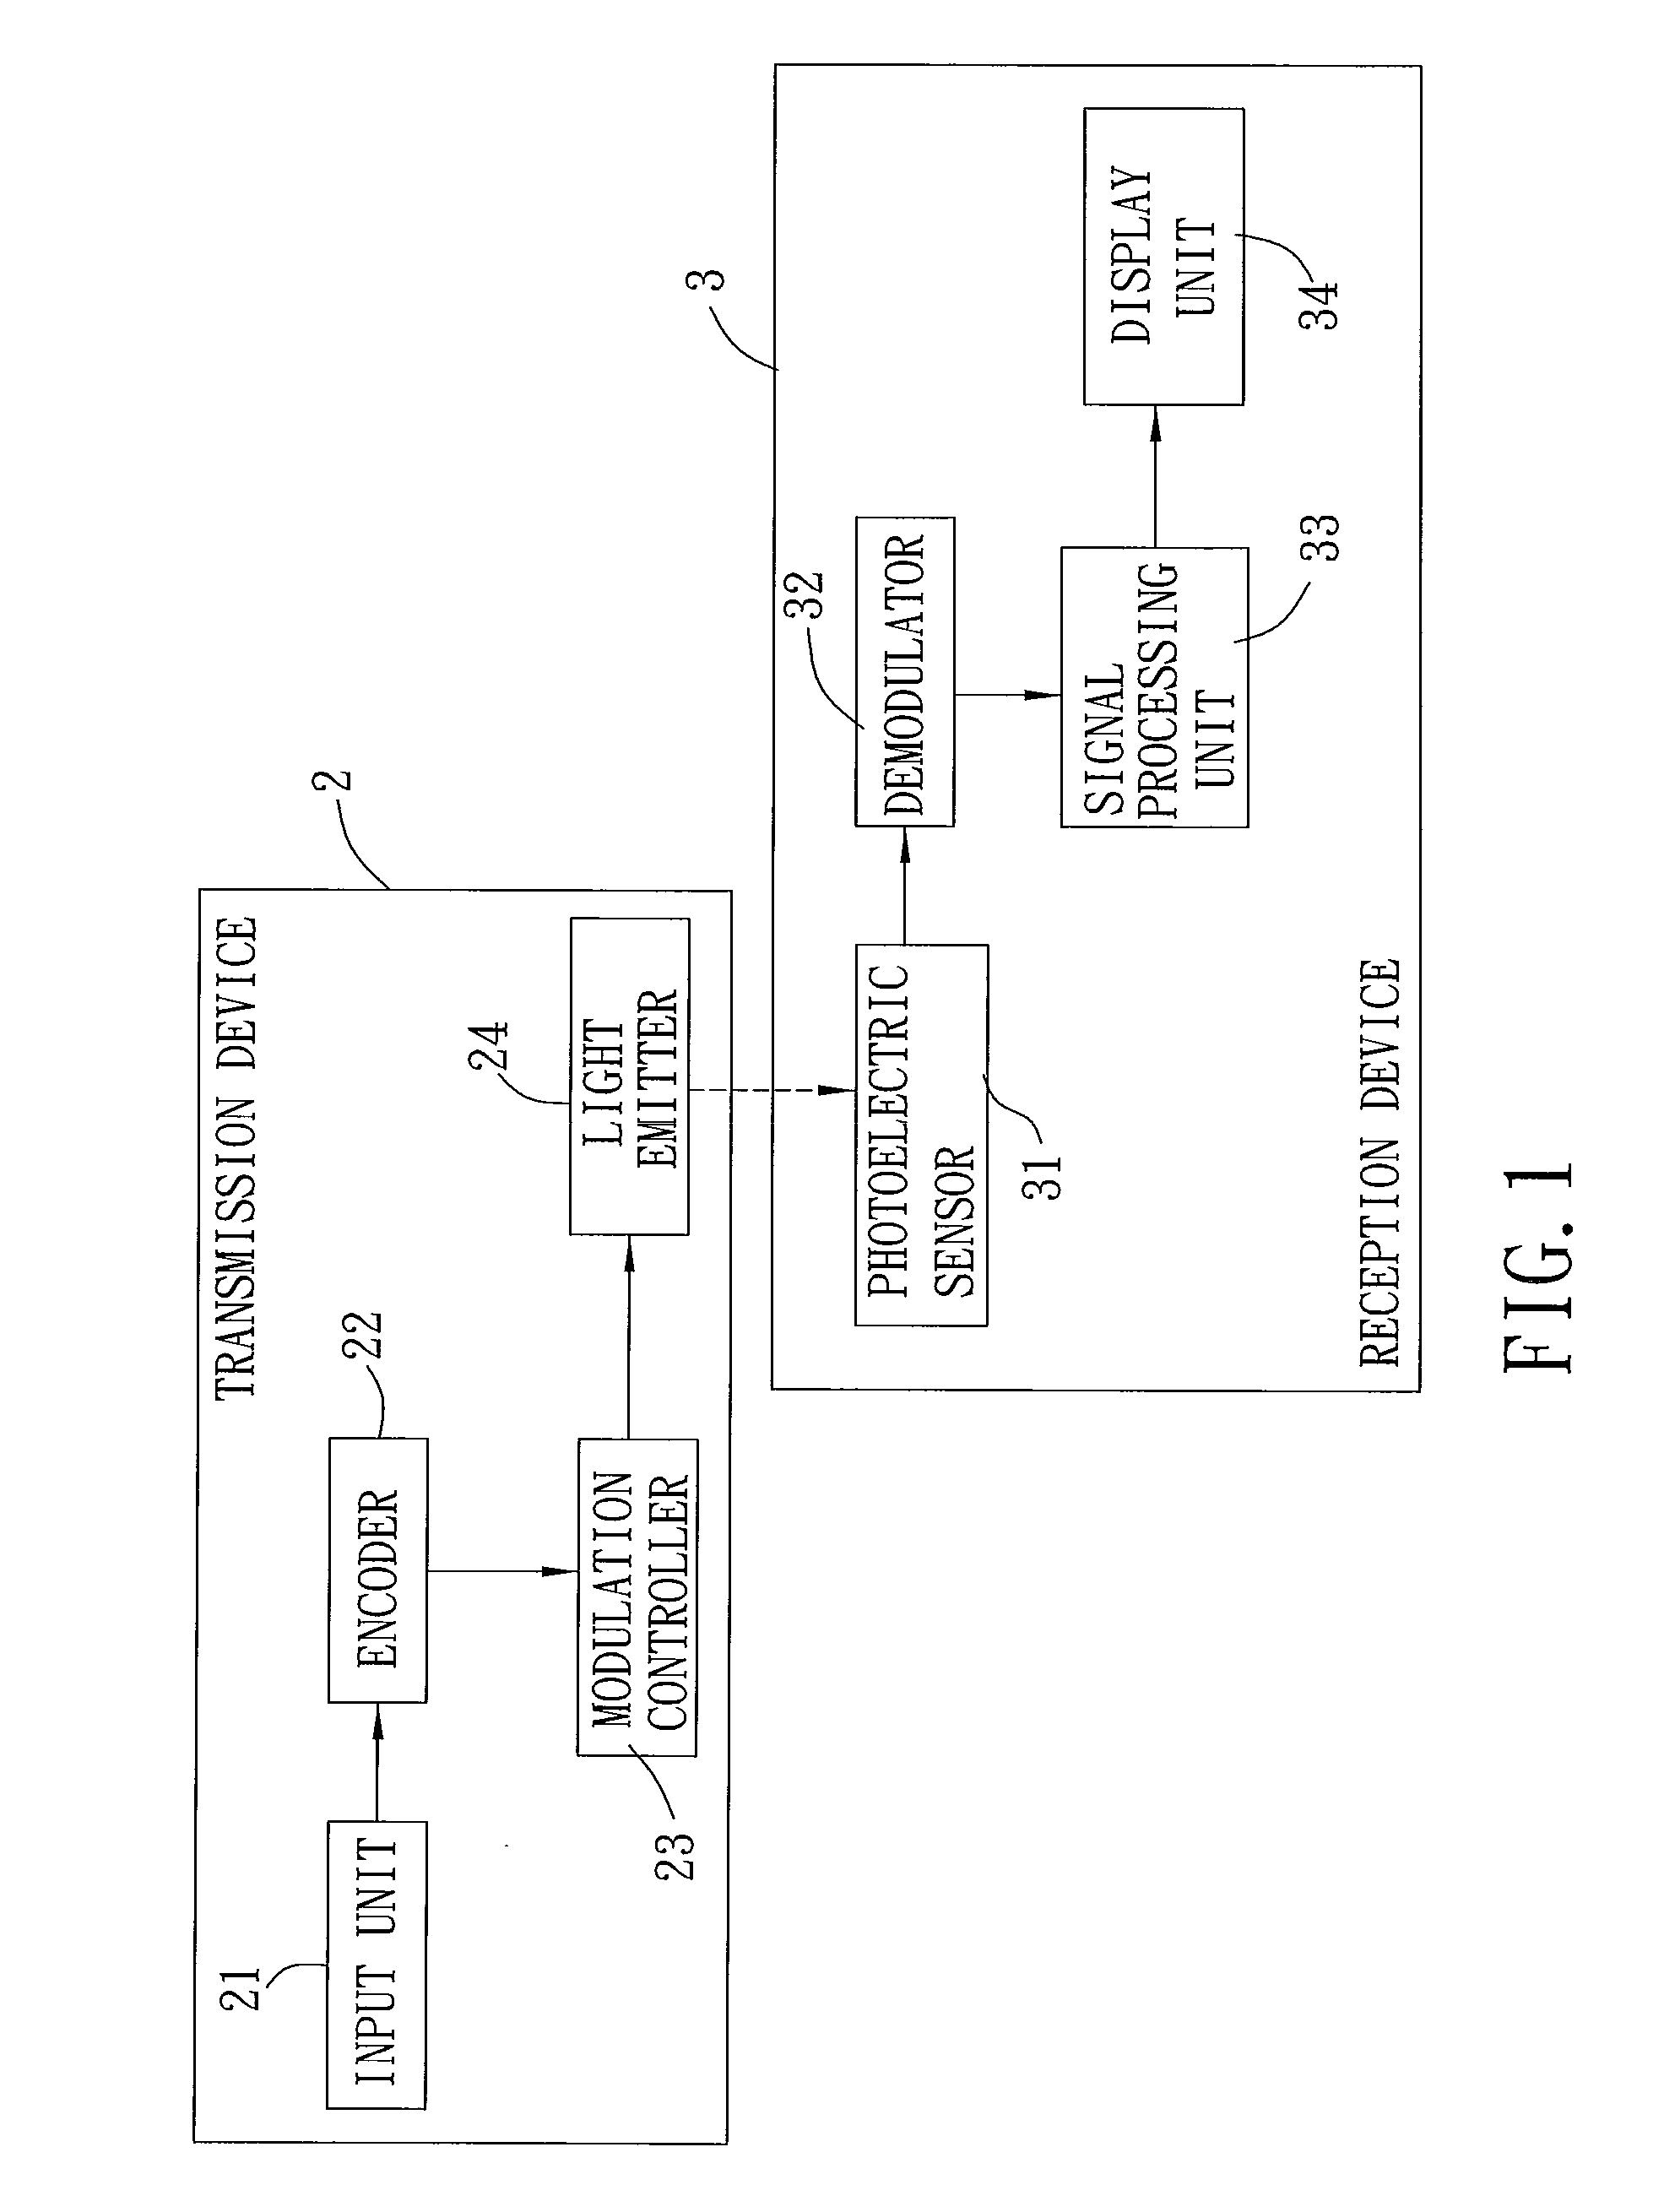 Real-time information transmission and reception system